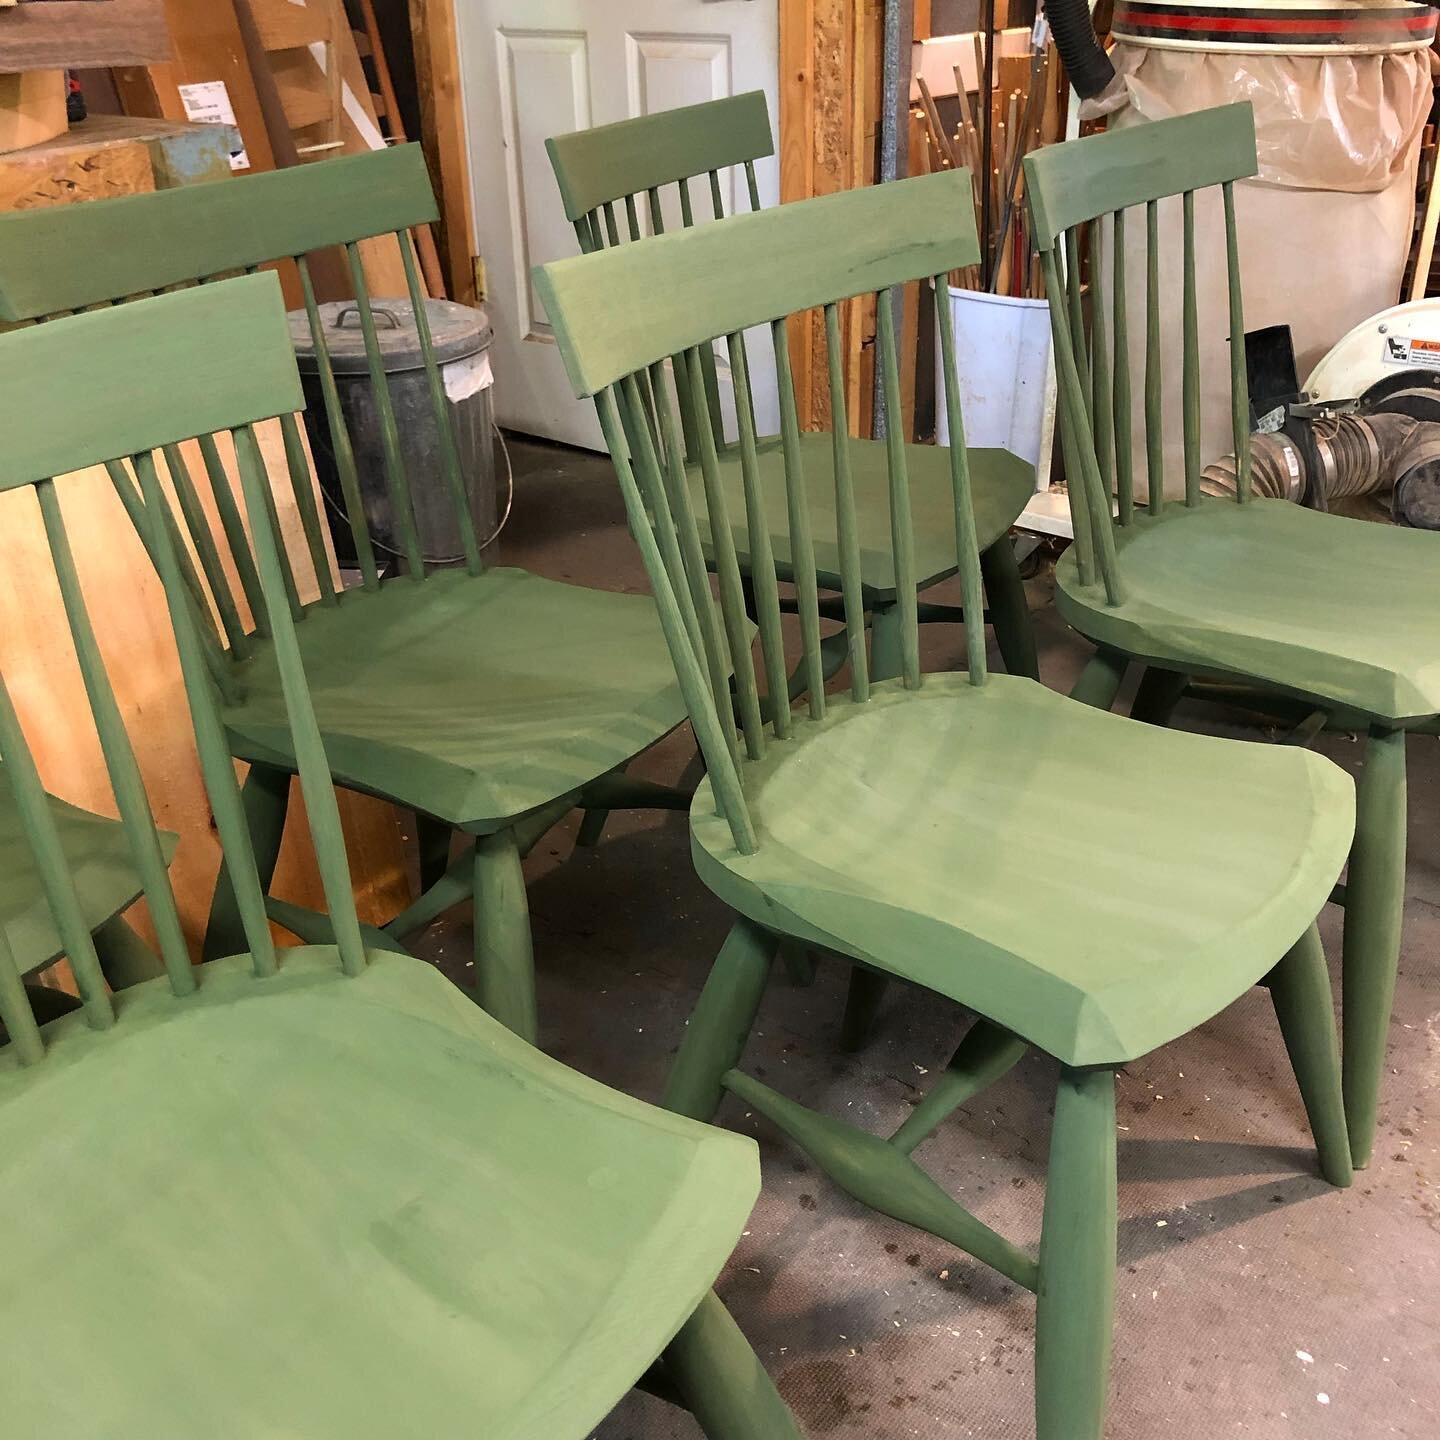 It&rsquo;s a Green Day. With a couple of coats of #realmilkpaintco green on the chairs they are close to the finish line and the details start to pop. 

Windsor chairs are made of different types of utilizing each of their strengths: maple legs for s